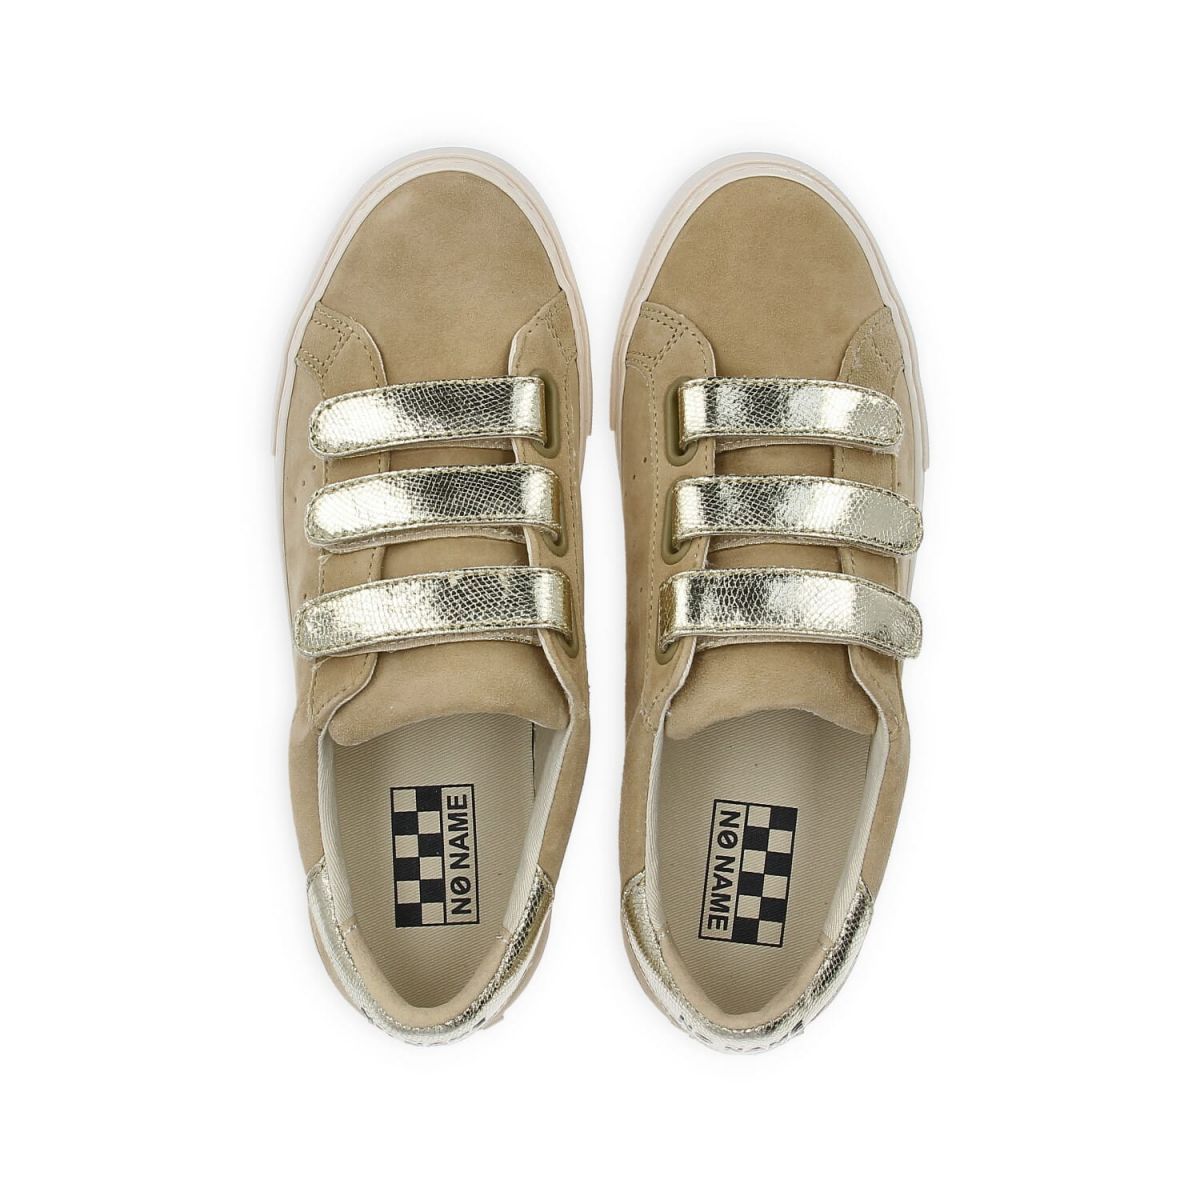 Arcade Straps Suede Beige Sneakers KNGDWI0418 - 3